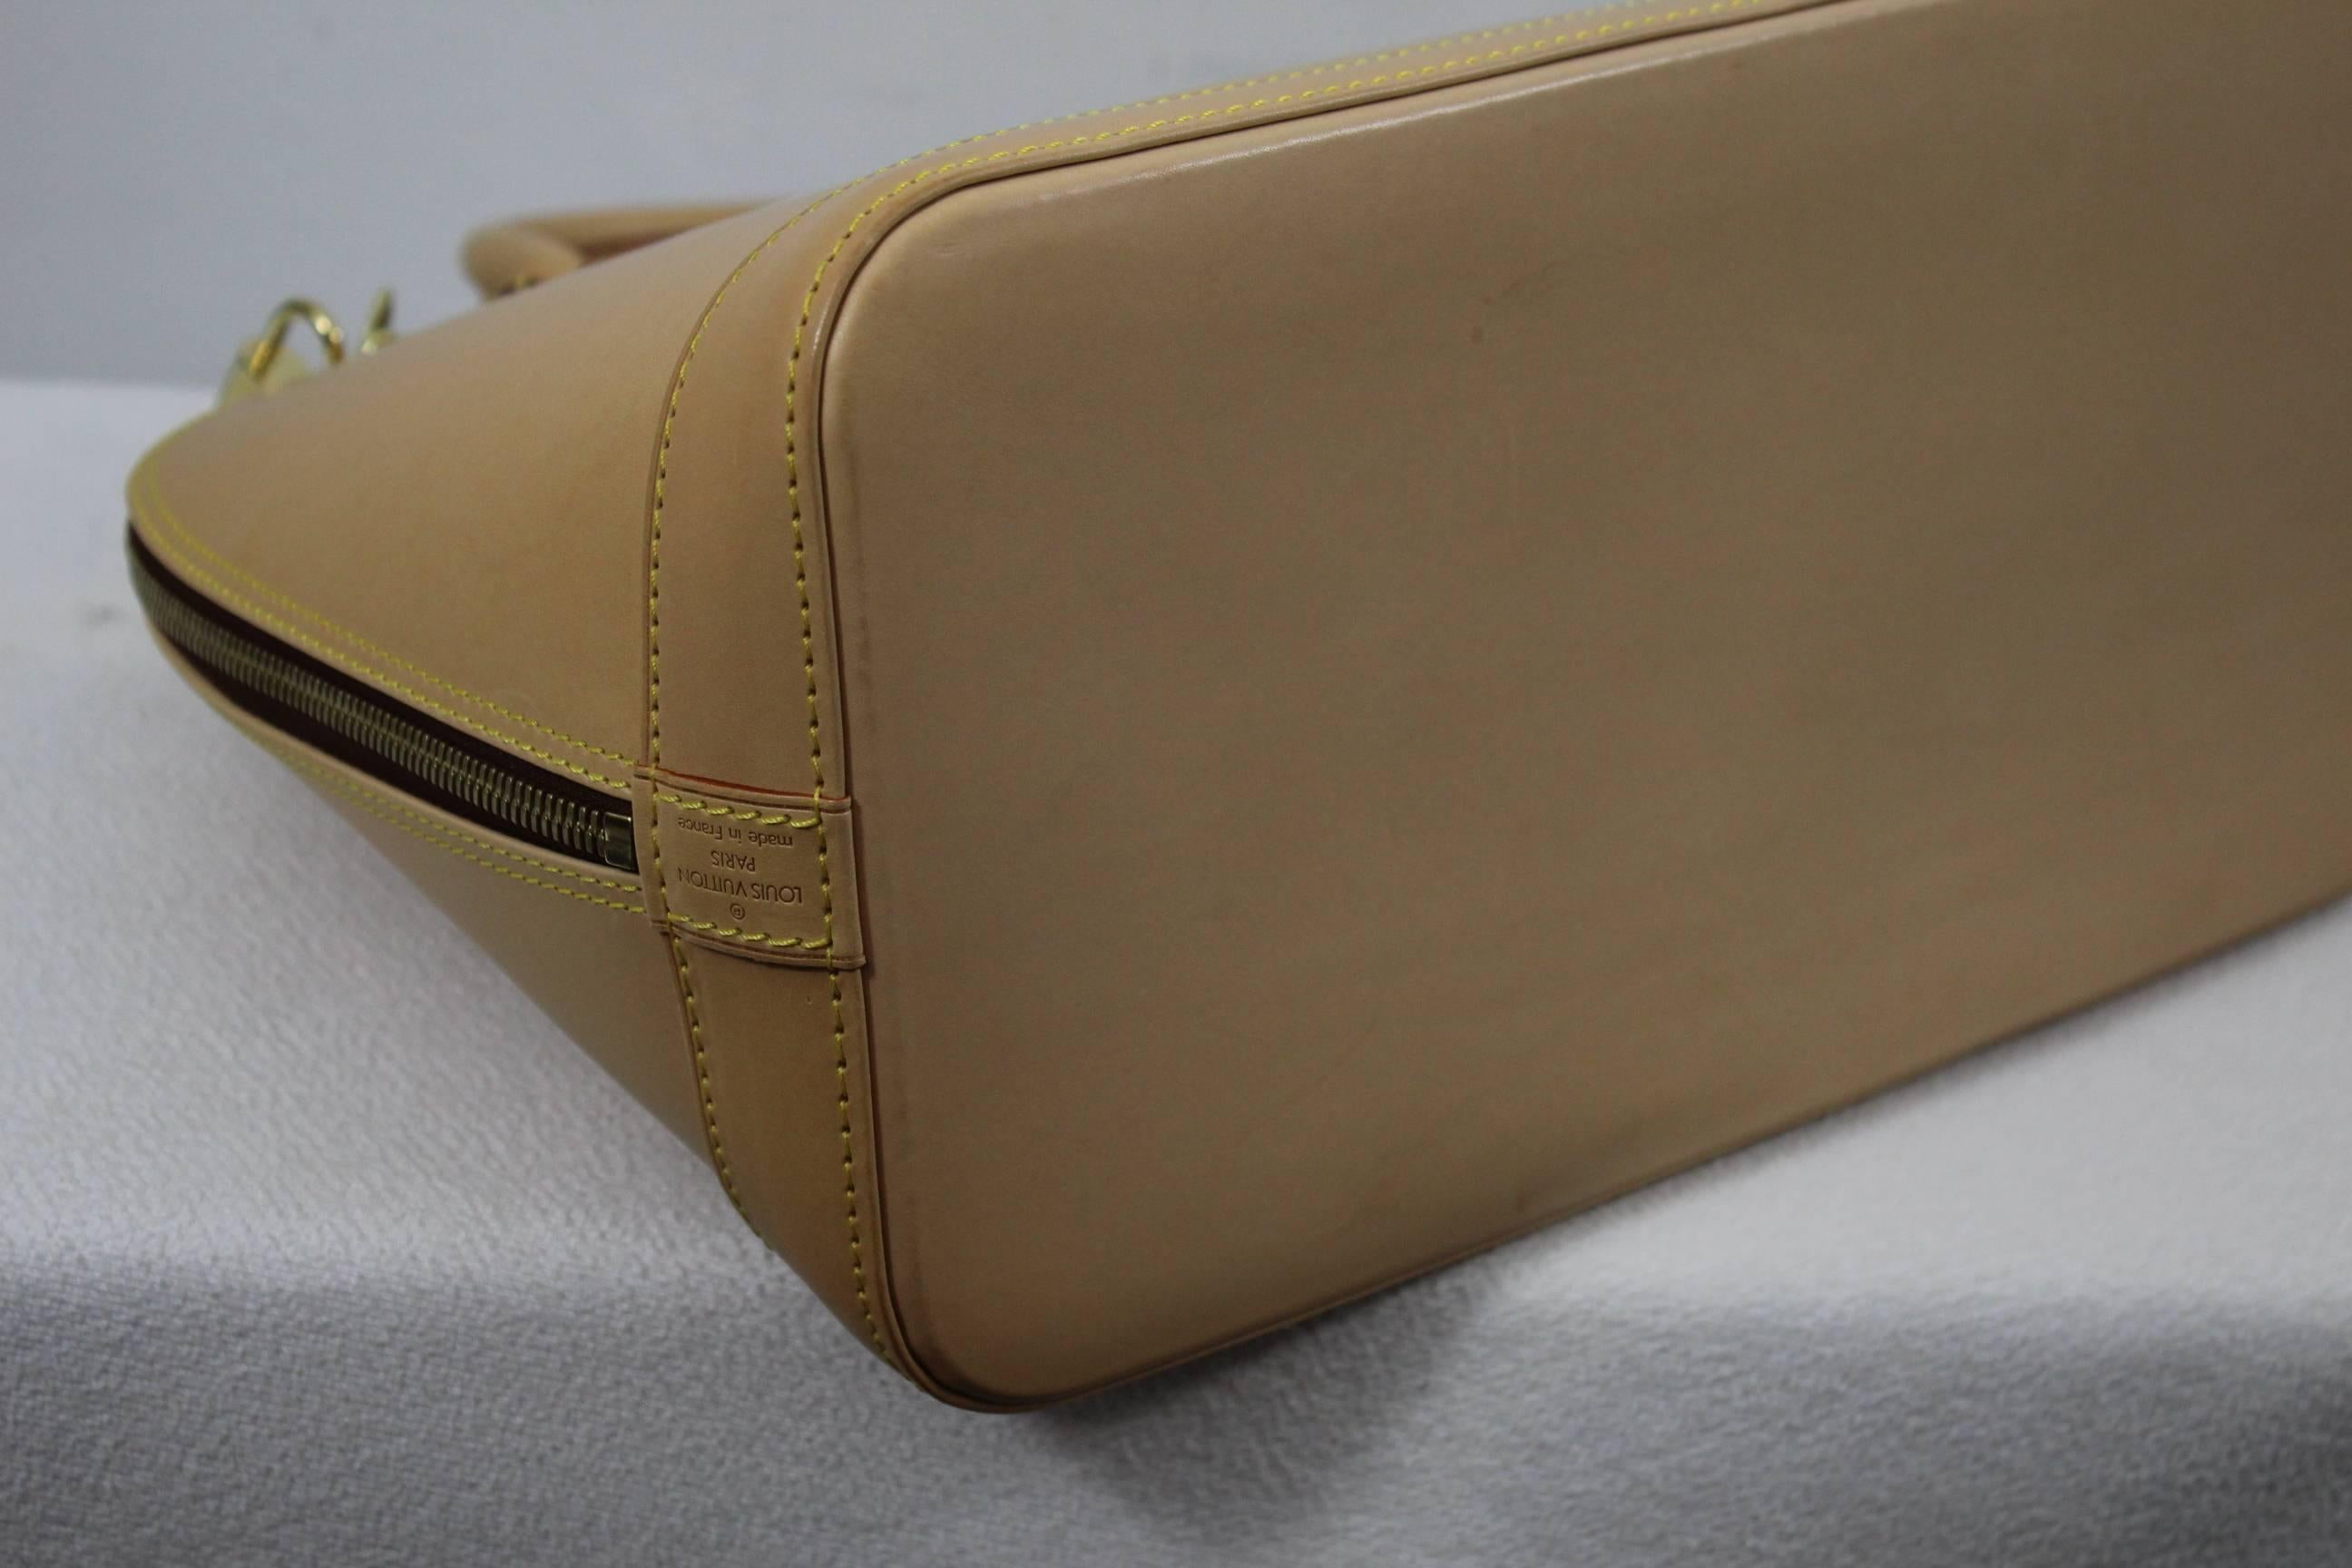 Women's Alma Louis Vuitton Bag all in natural leather.